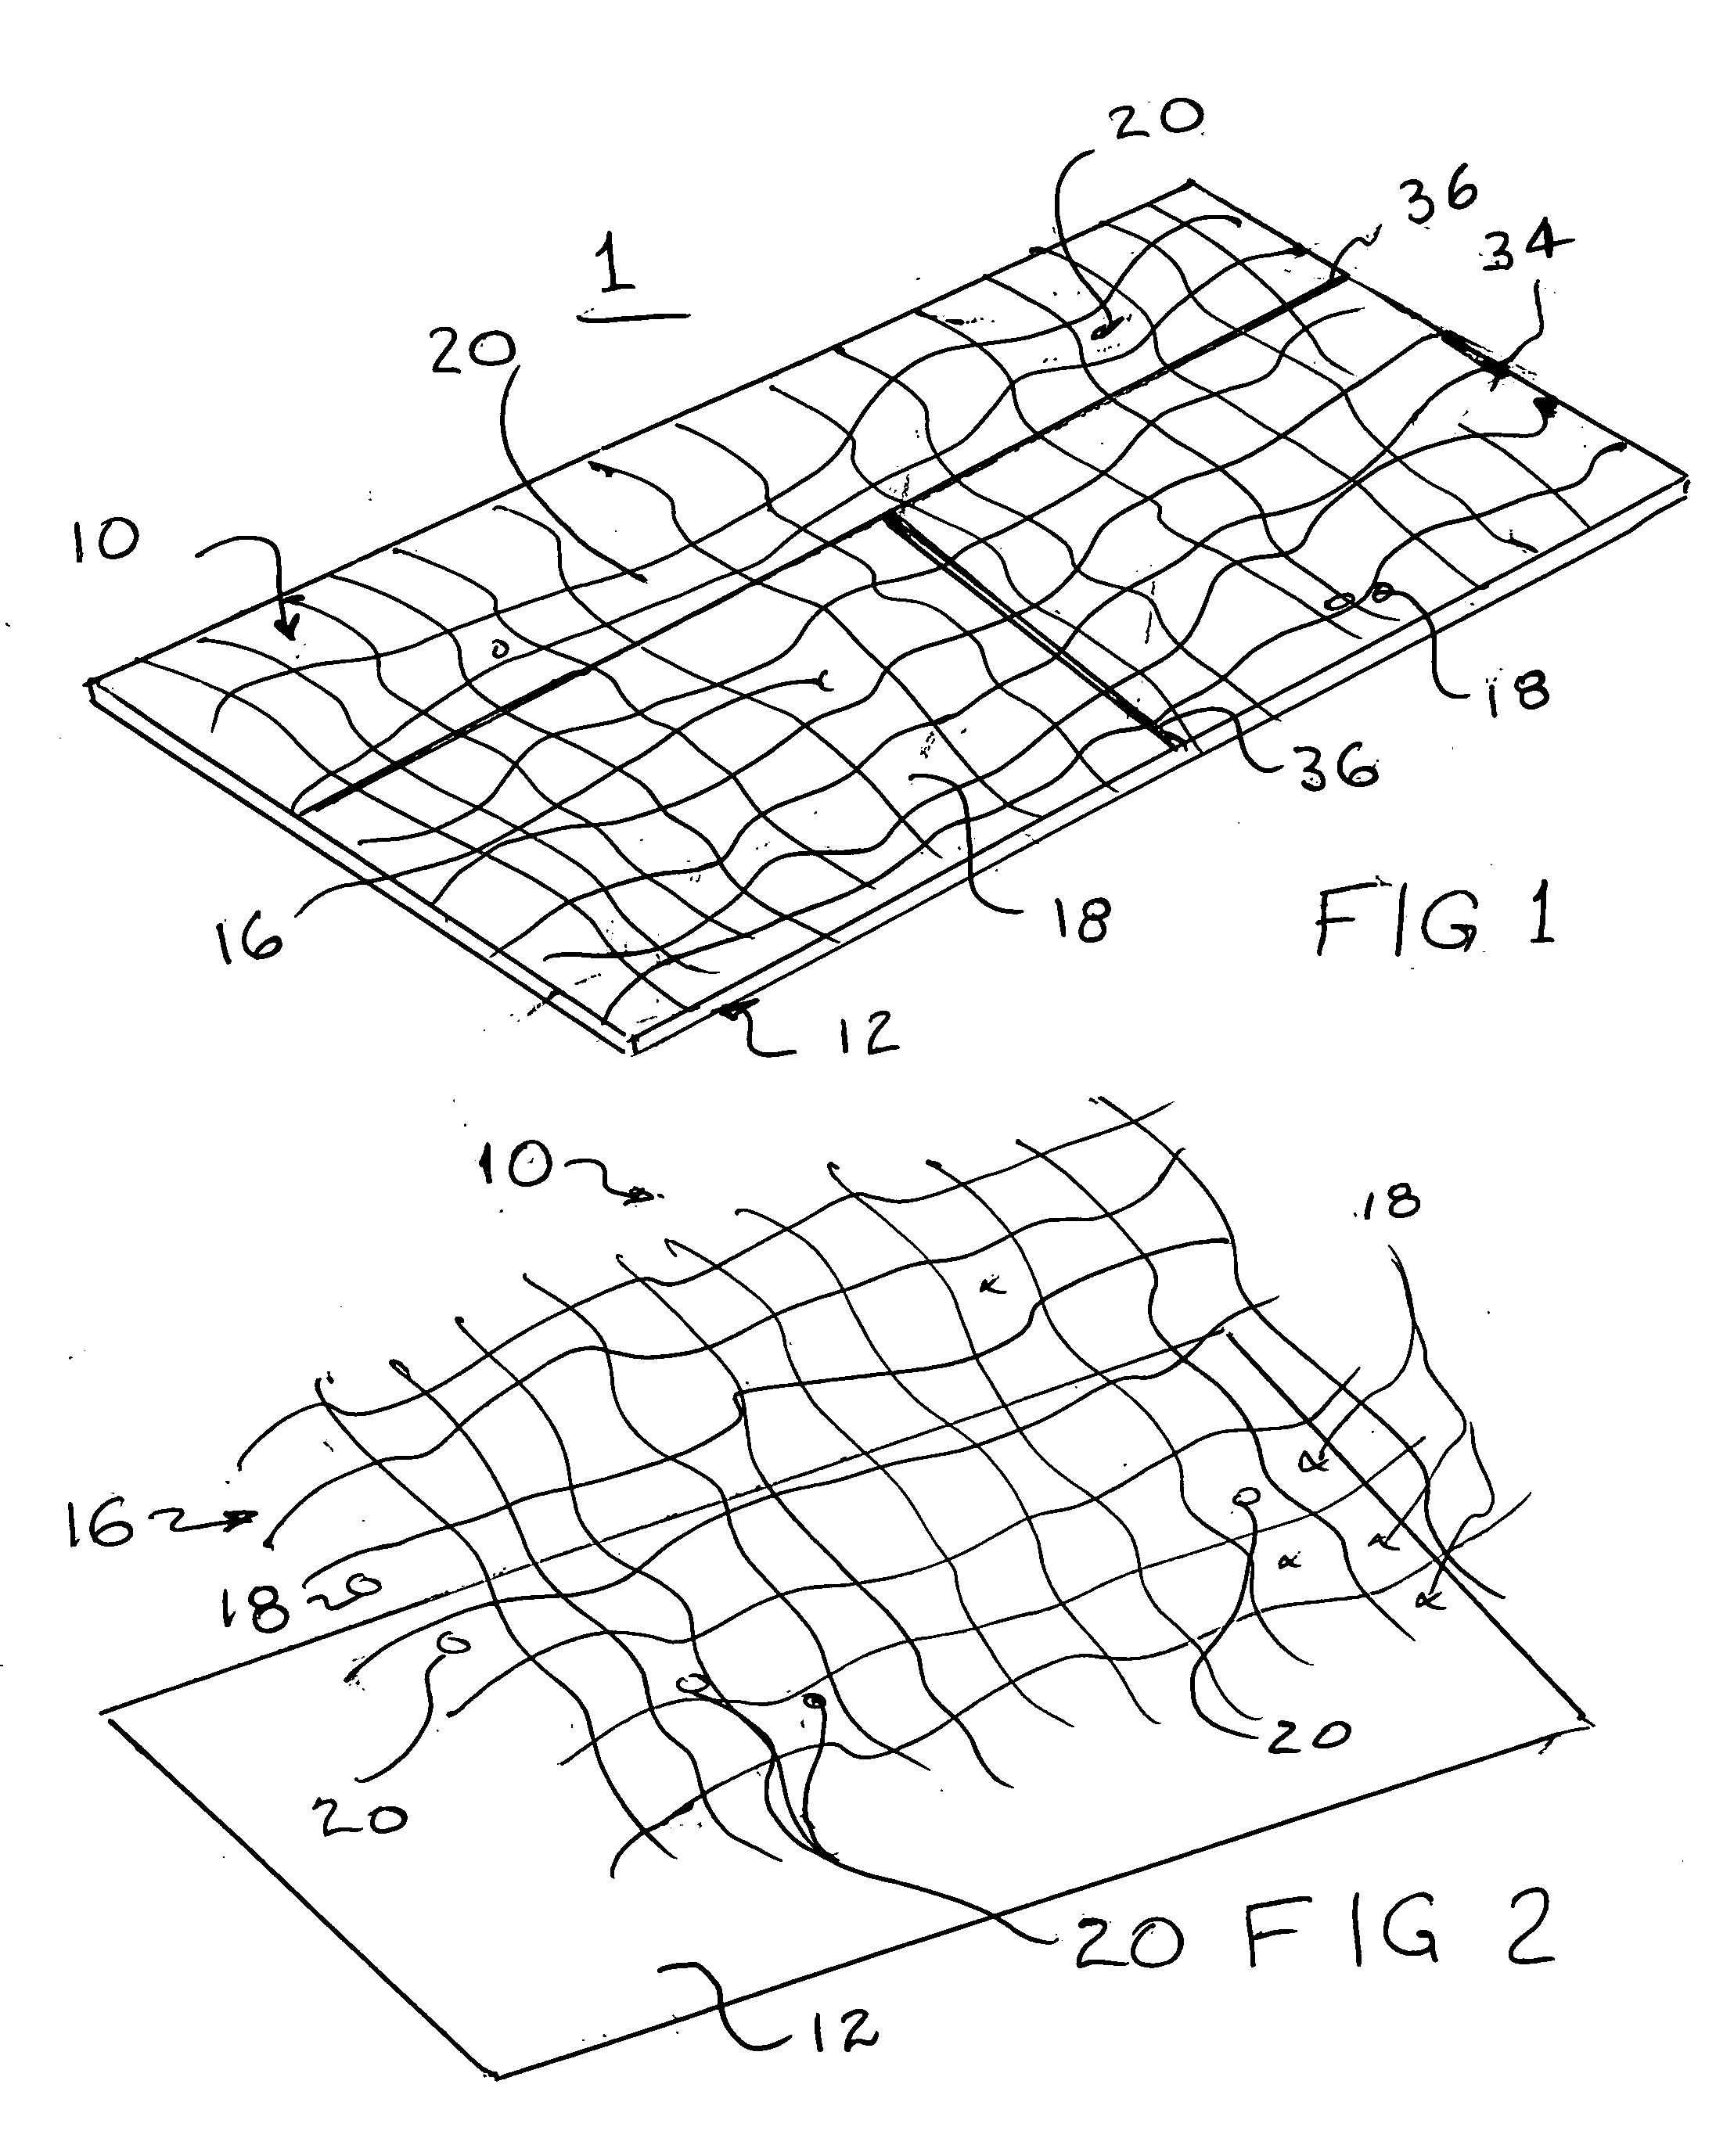 Seed mat system